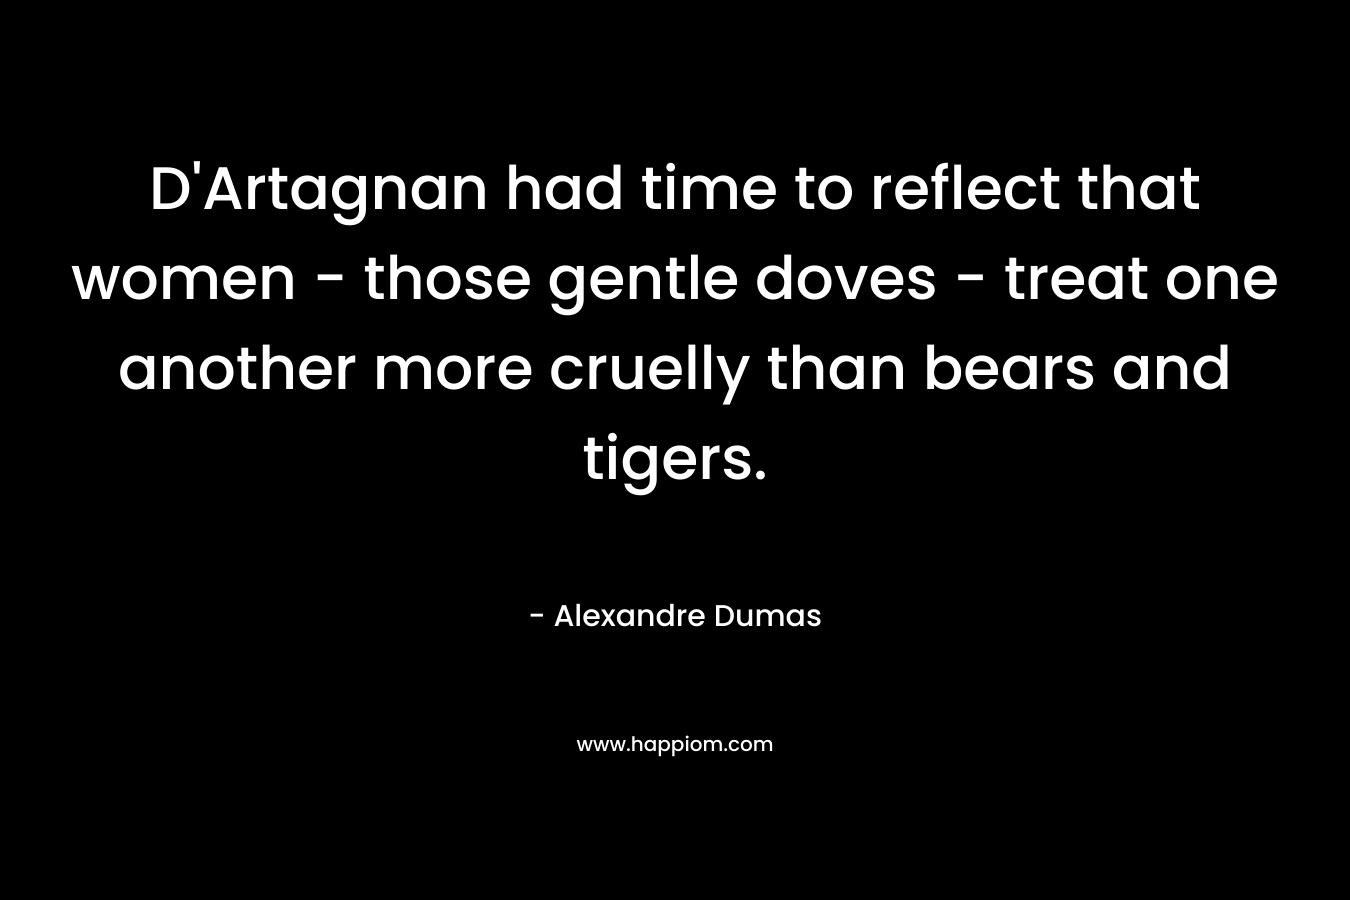 D'Artagnan had time to reflect that women - those gentle doves - treat one another more cruelly than bears and tigers.